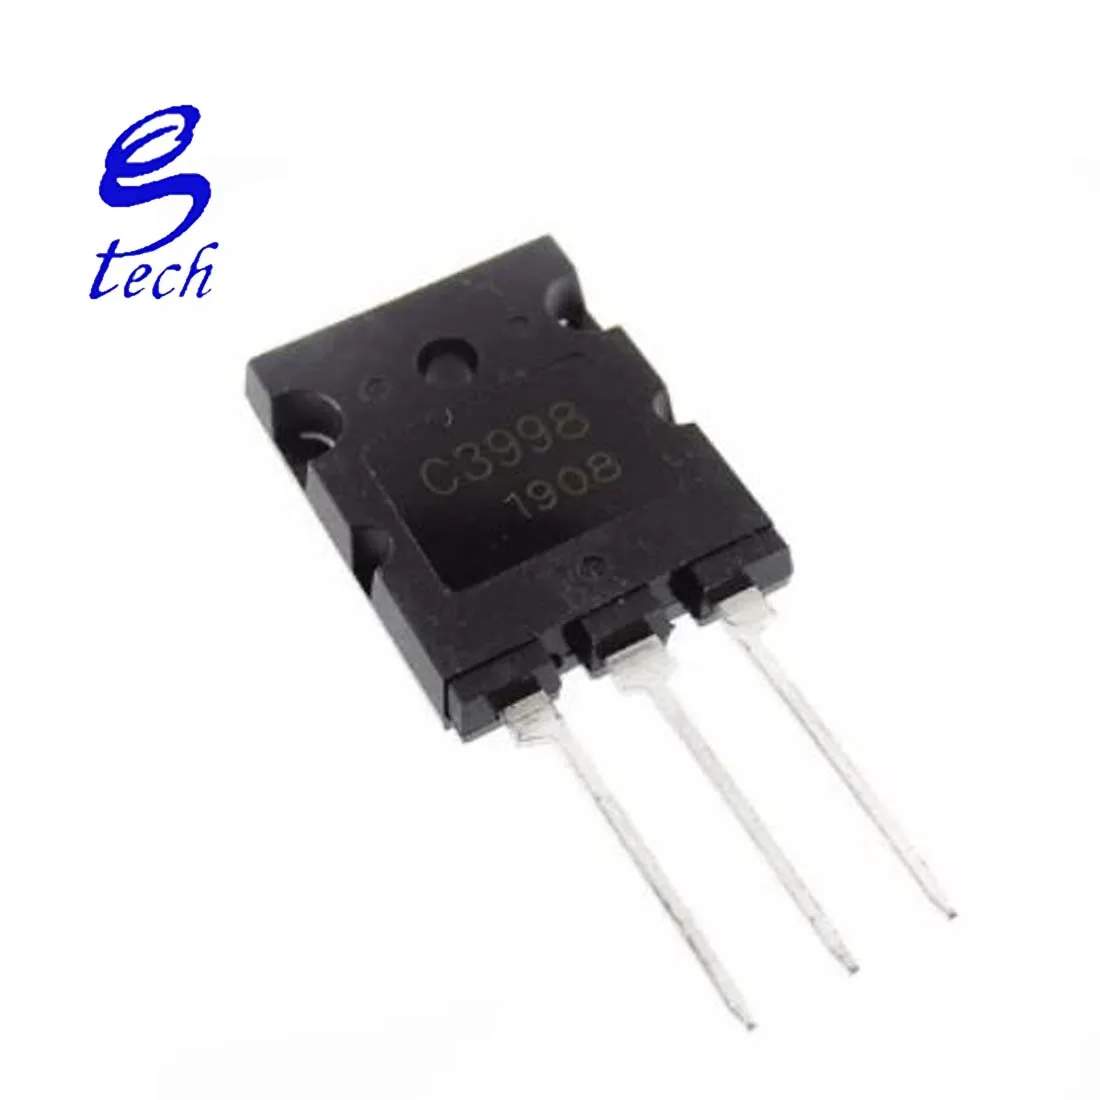 C3998 Electronic Components integrated circuit Transistors 2SC3998 TO-3P 25A C3998